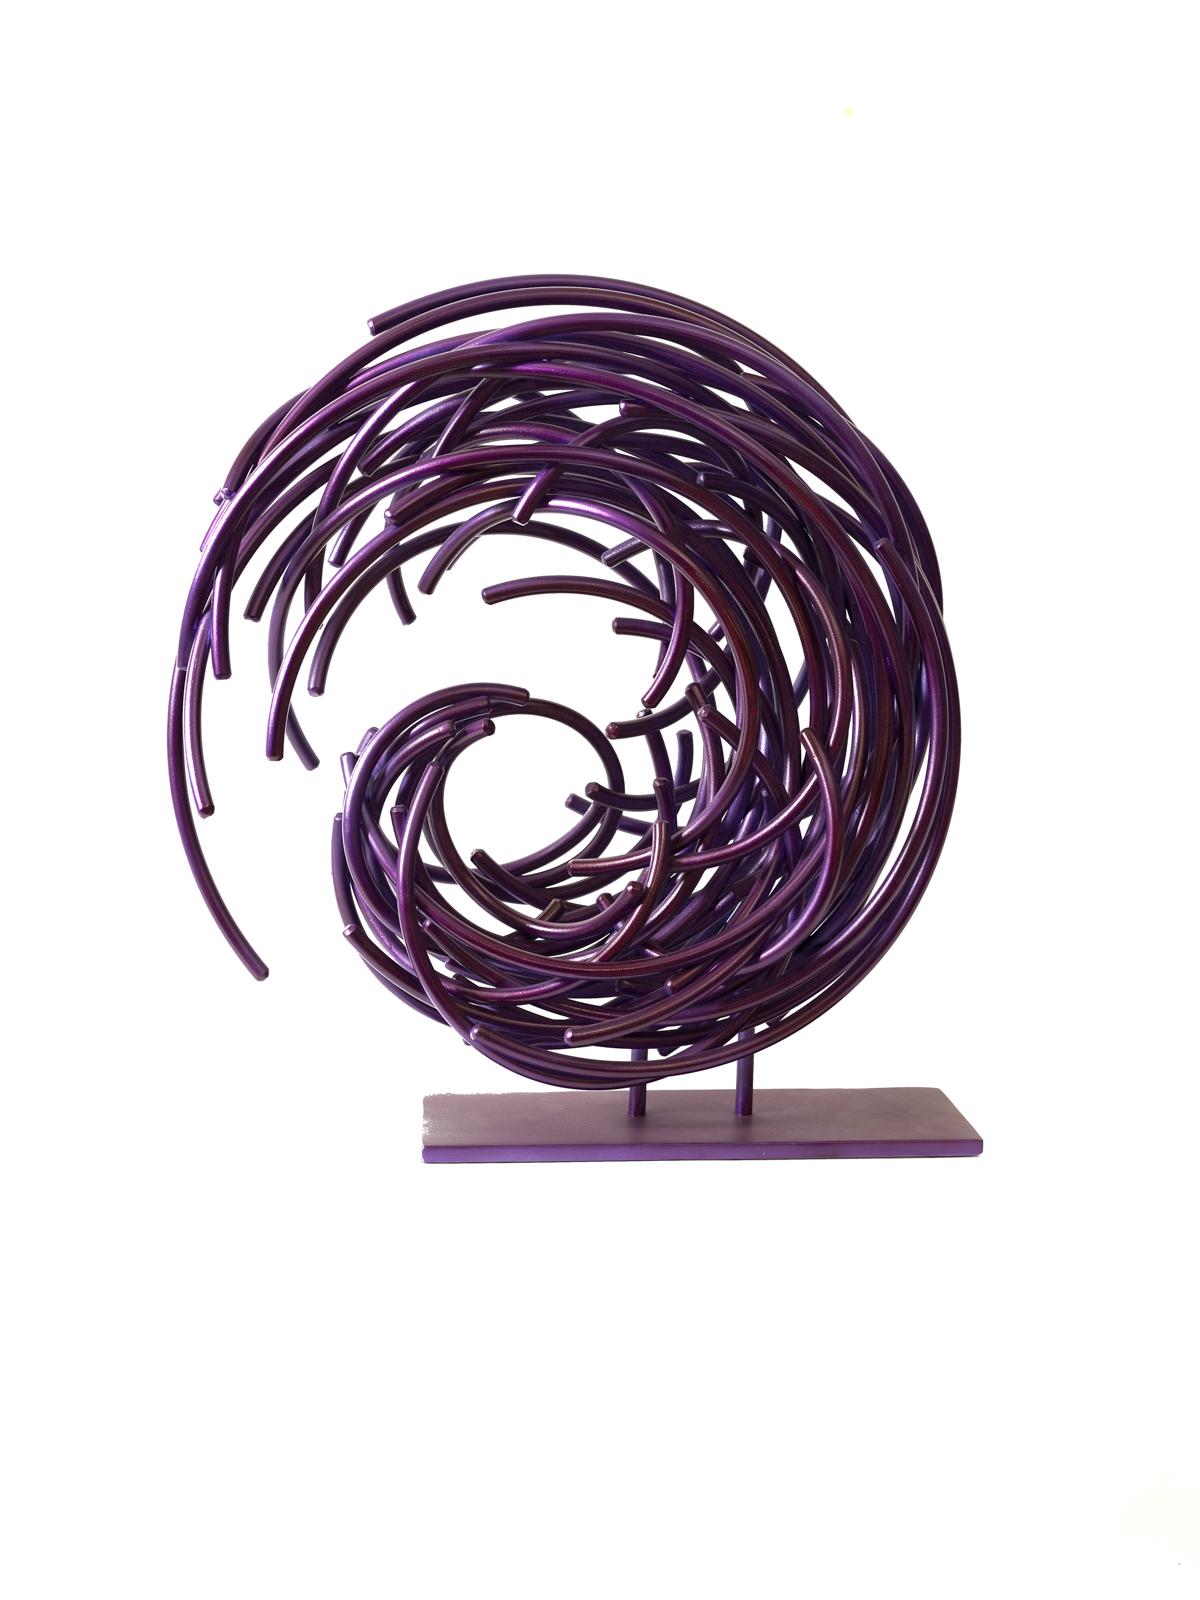 Maelstrom Series No 5 - layered, intersecting, forged aluminum sculpture For Sale 1